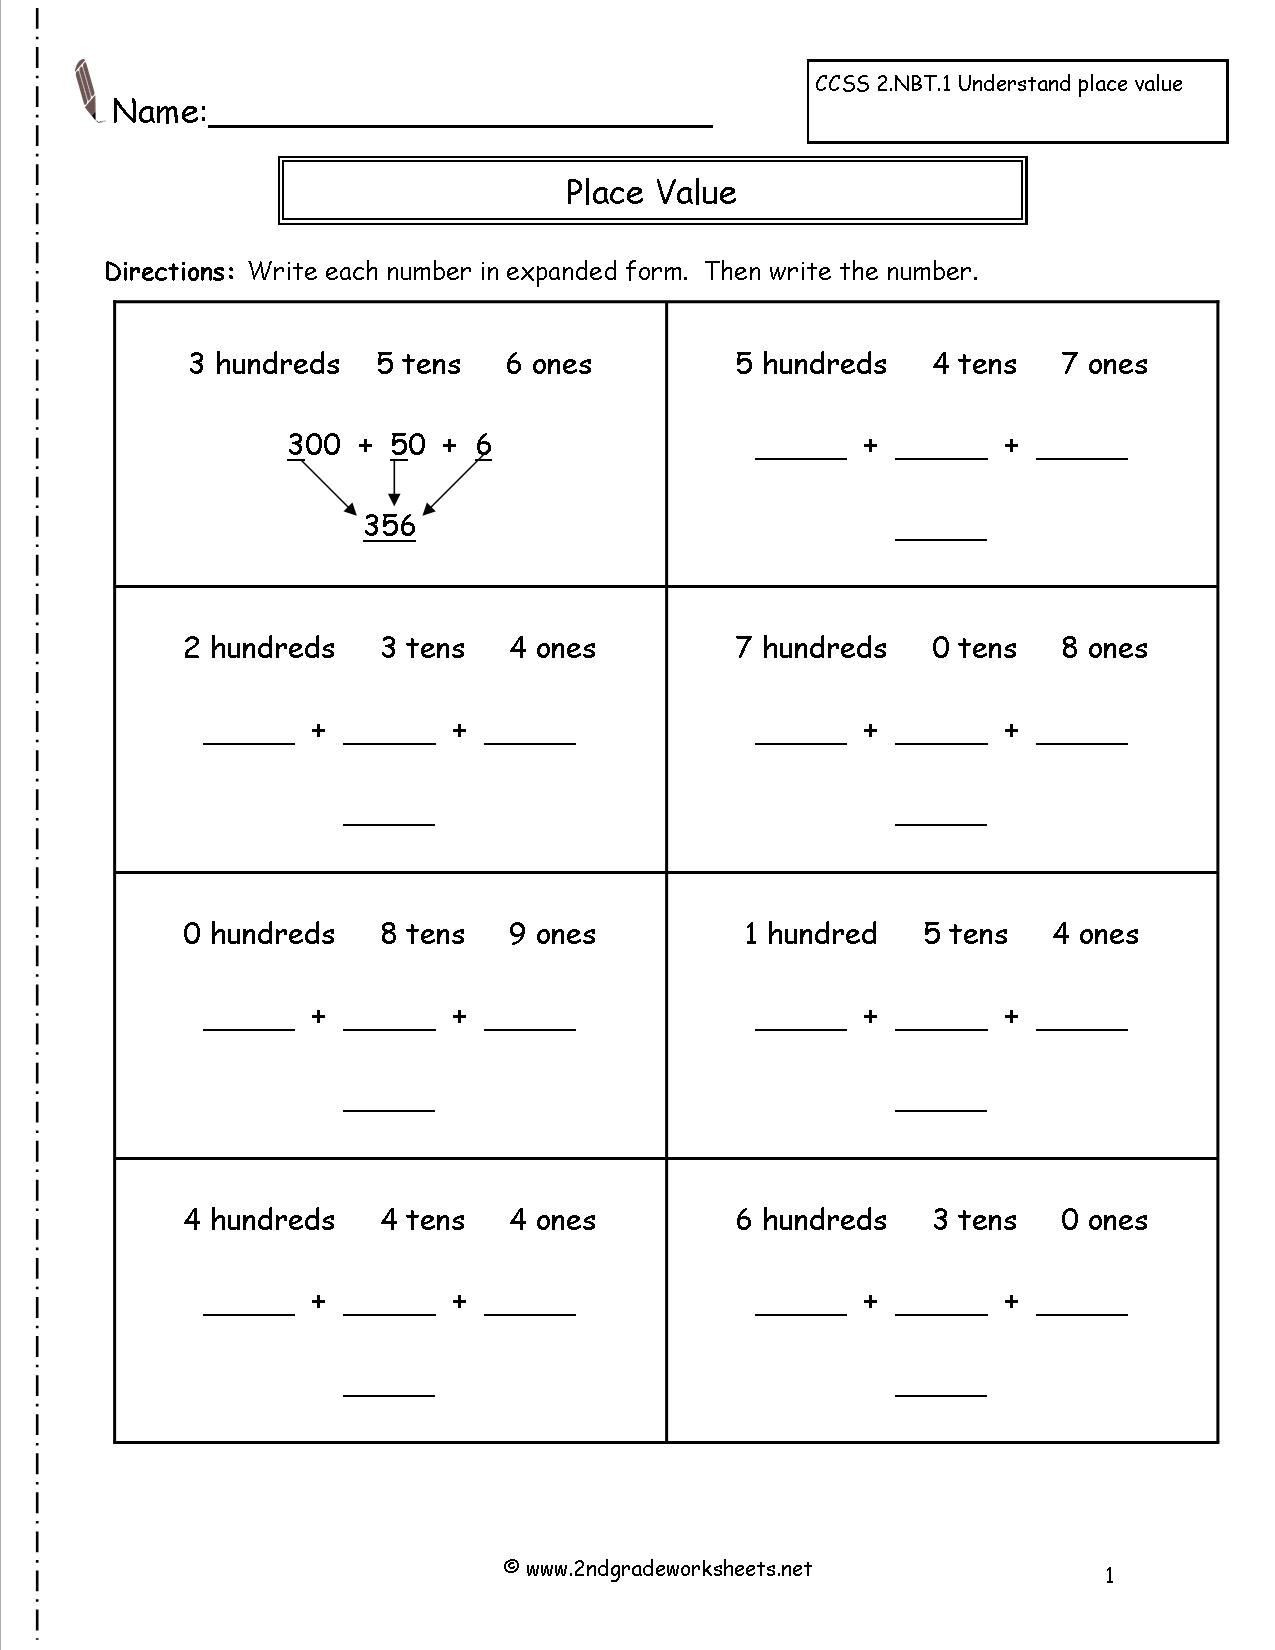 Free Math Worksheets Second Grade 2 Addition Adding whole Tens 4 Addends